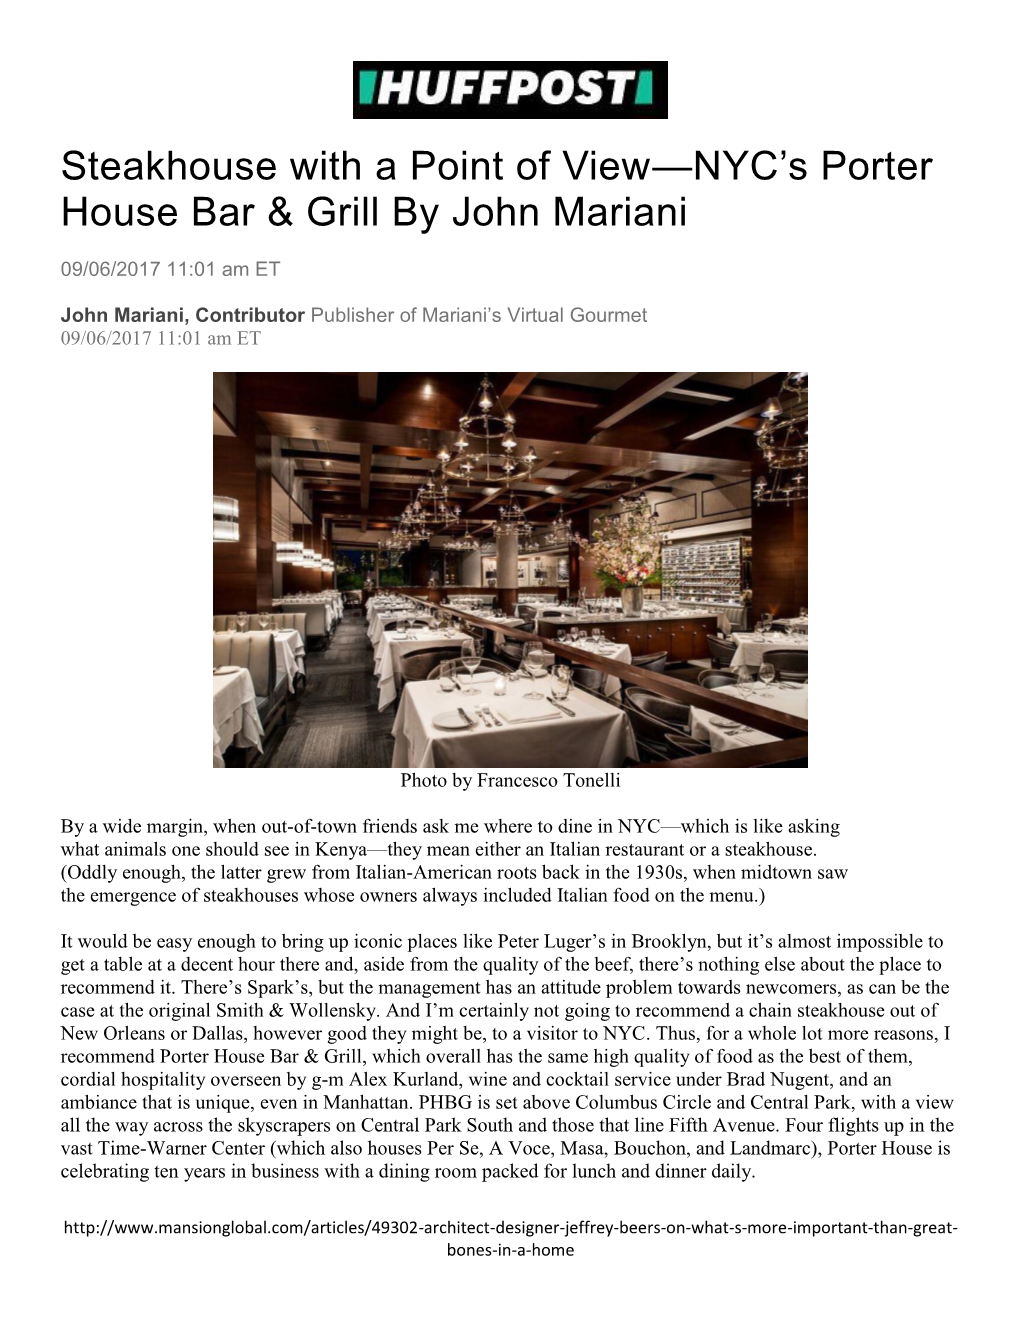 Steakhouse with a Point of View—NYC's Porter House Bar & Grill